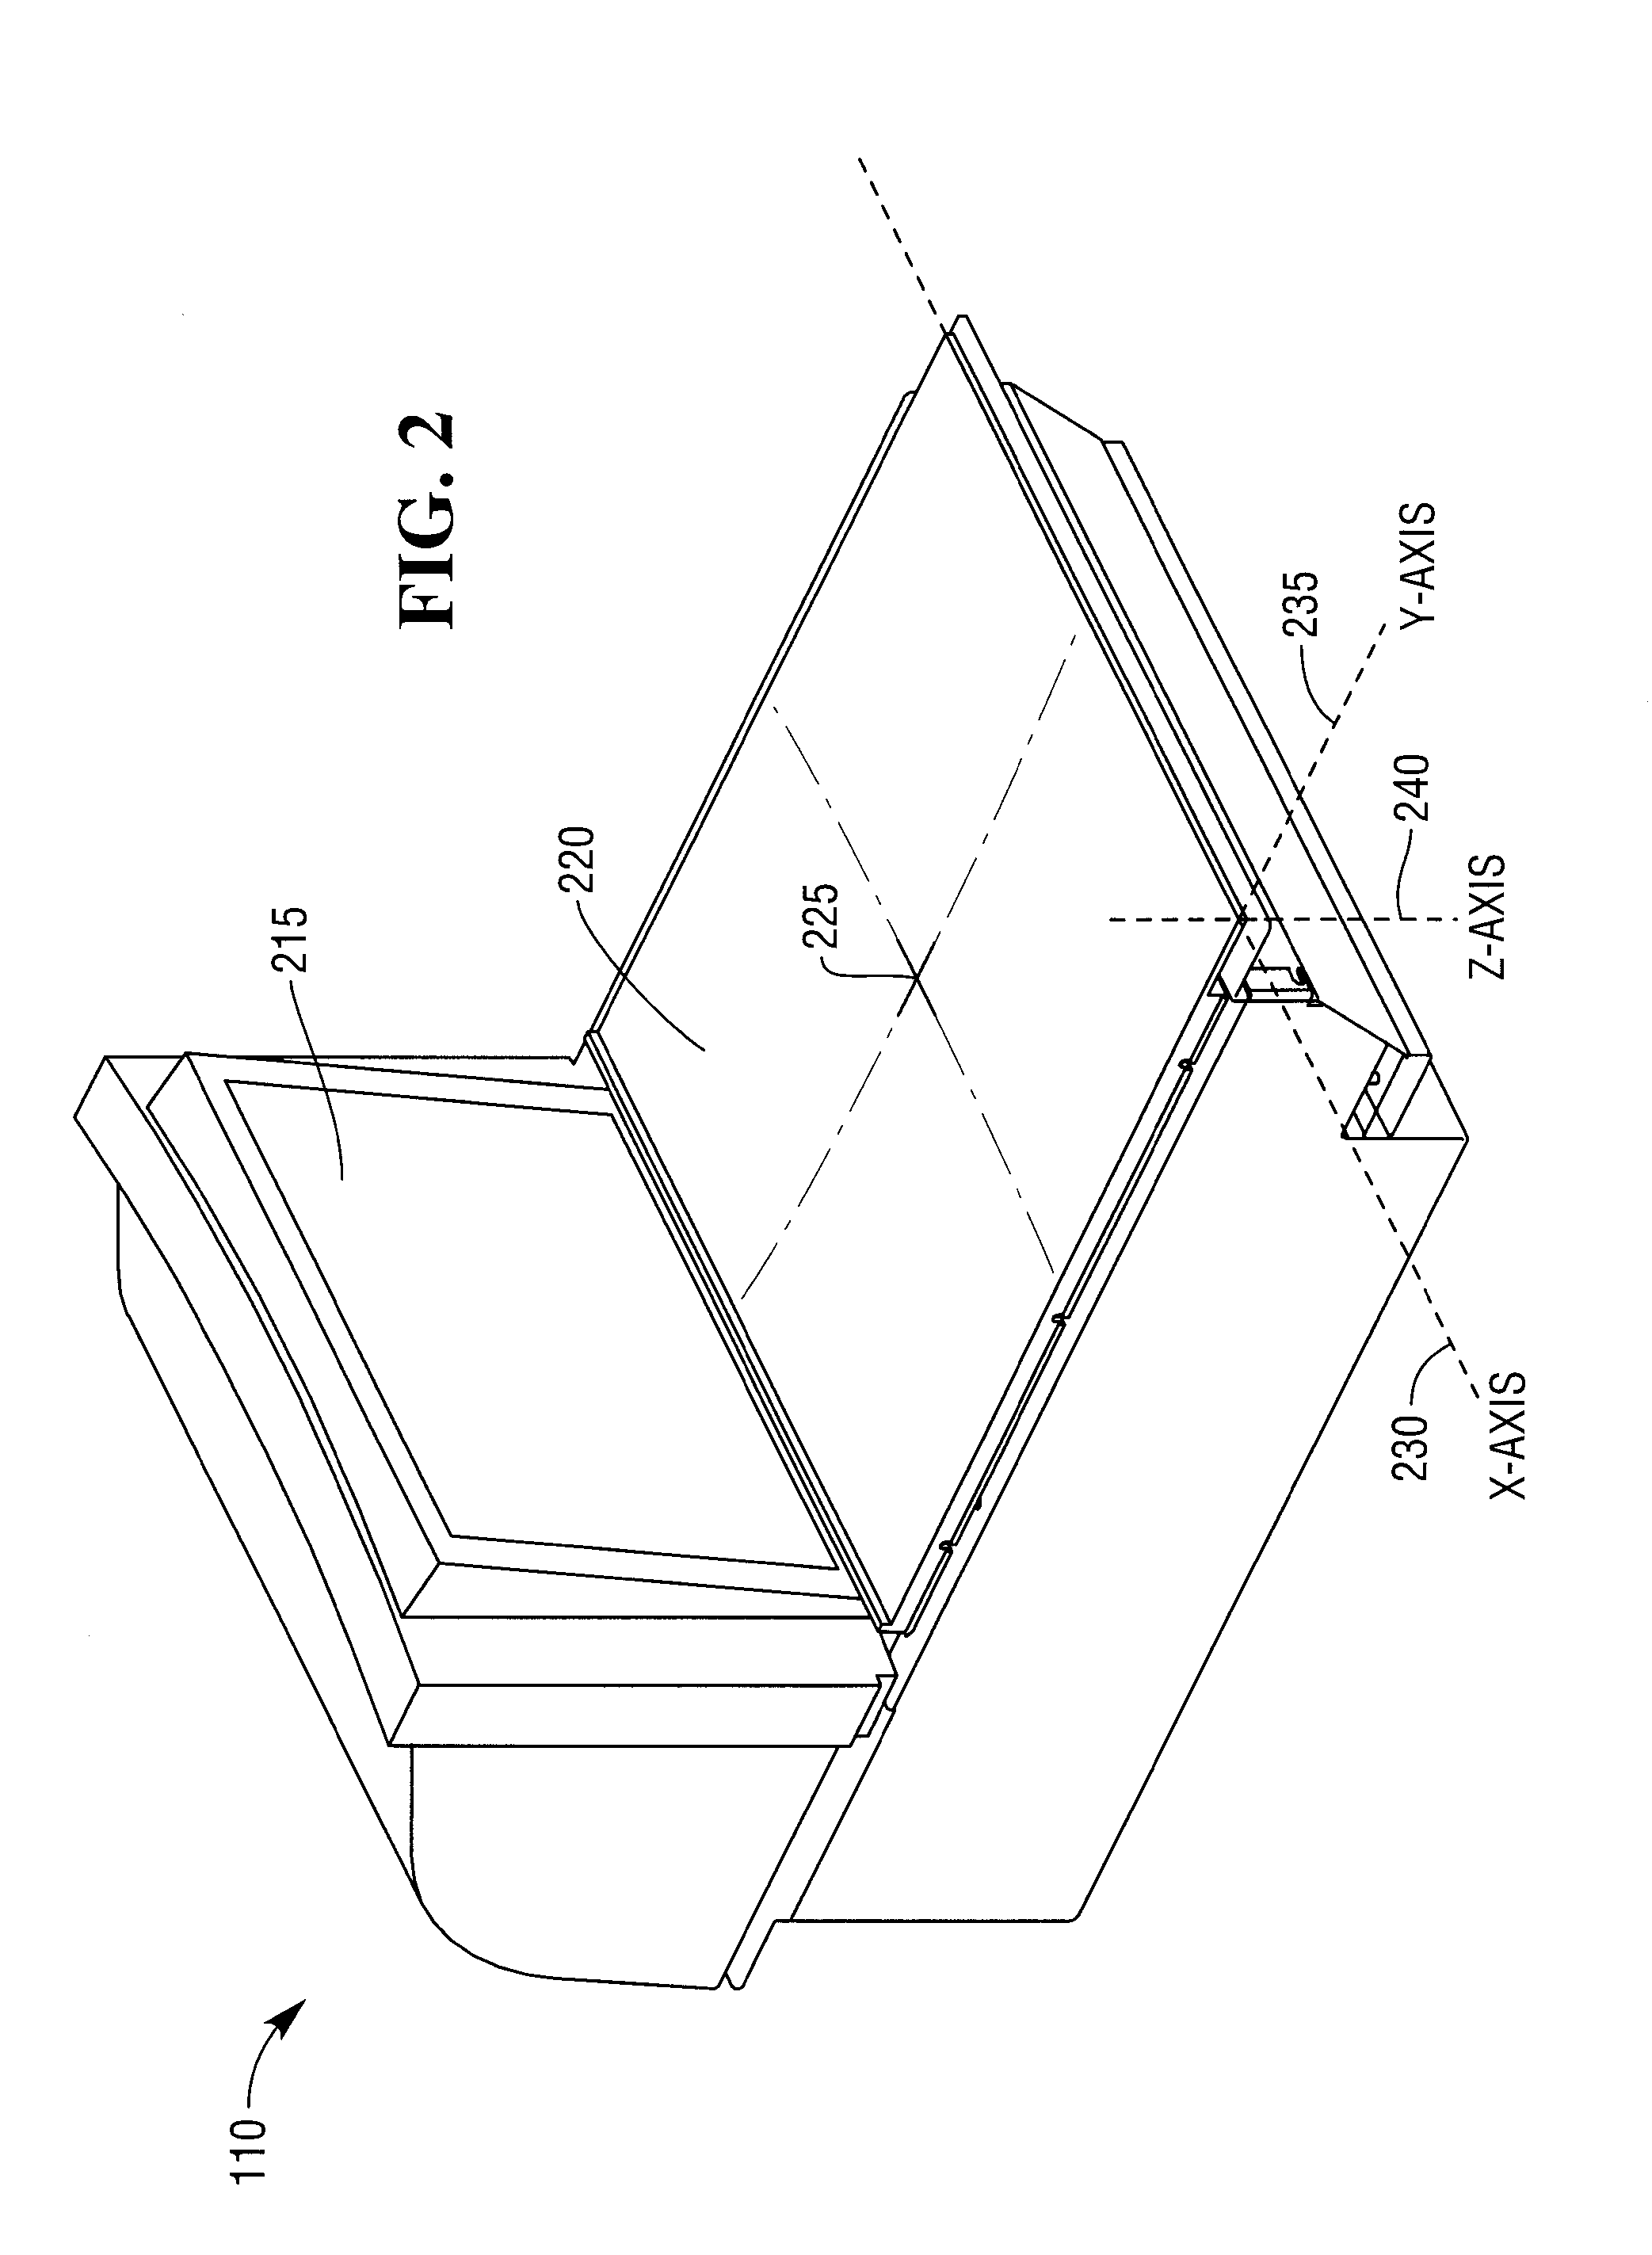 Scanner and weigh scale with self-centering surface